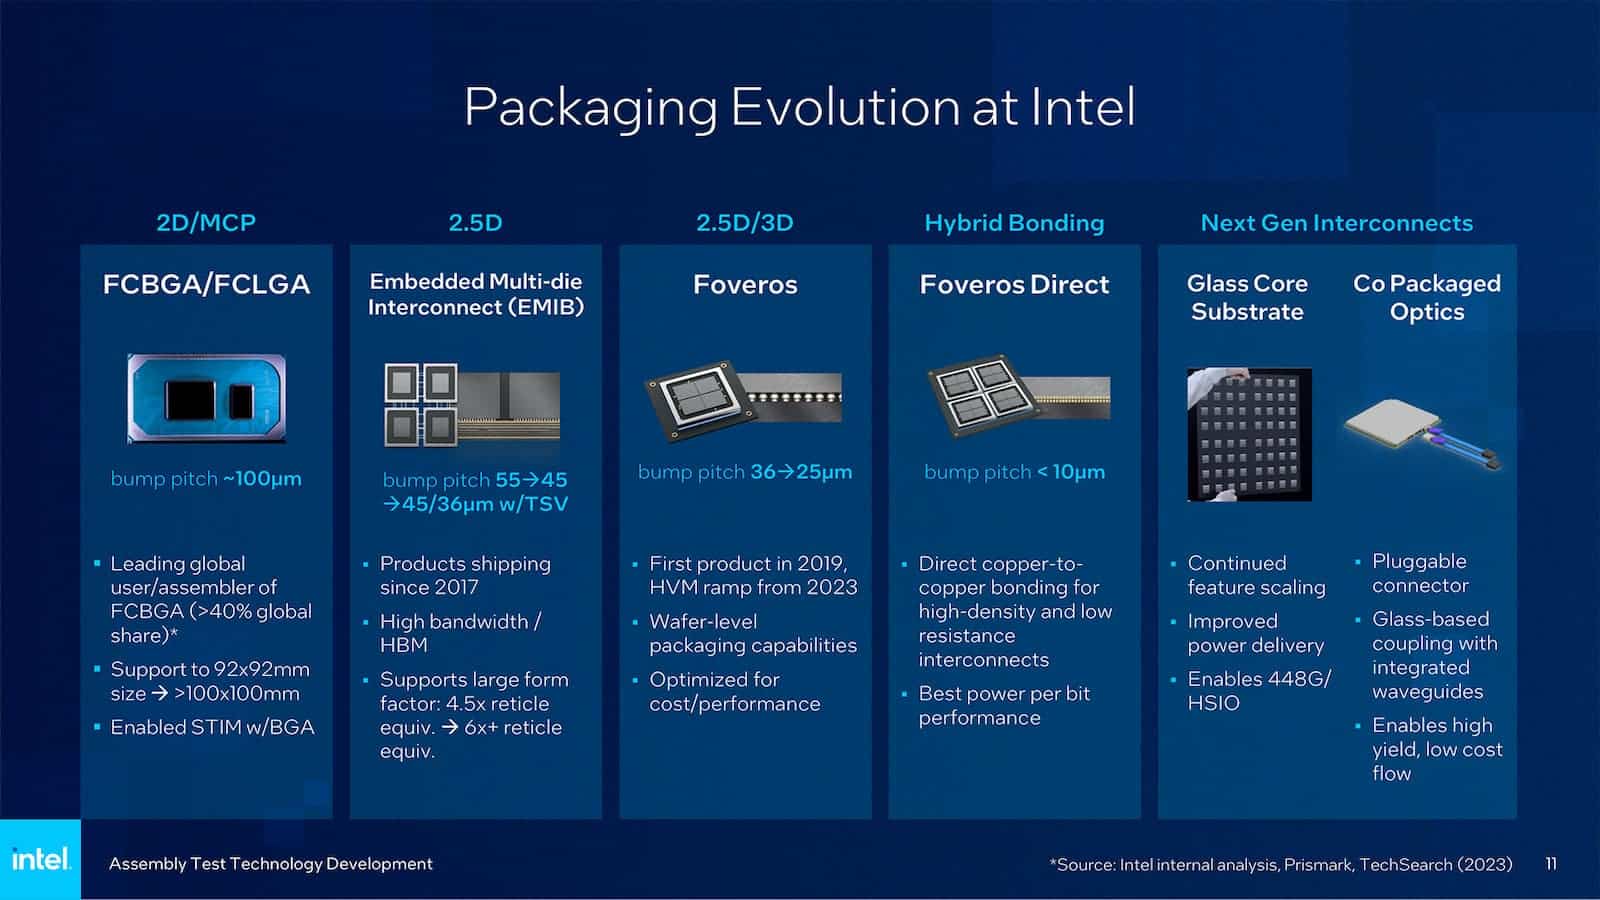 industrie puces : Packaging evolution